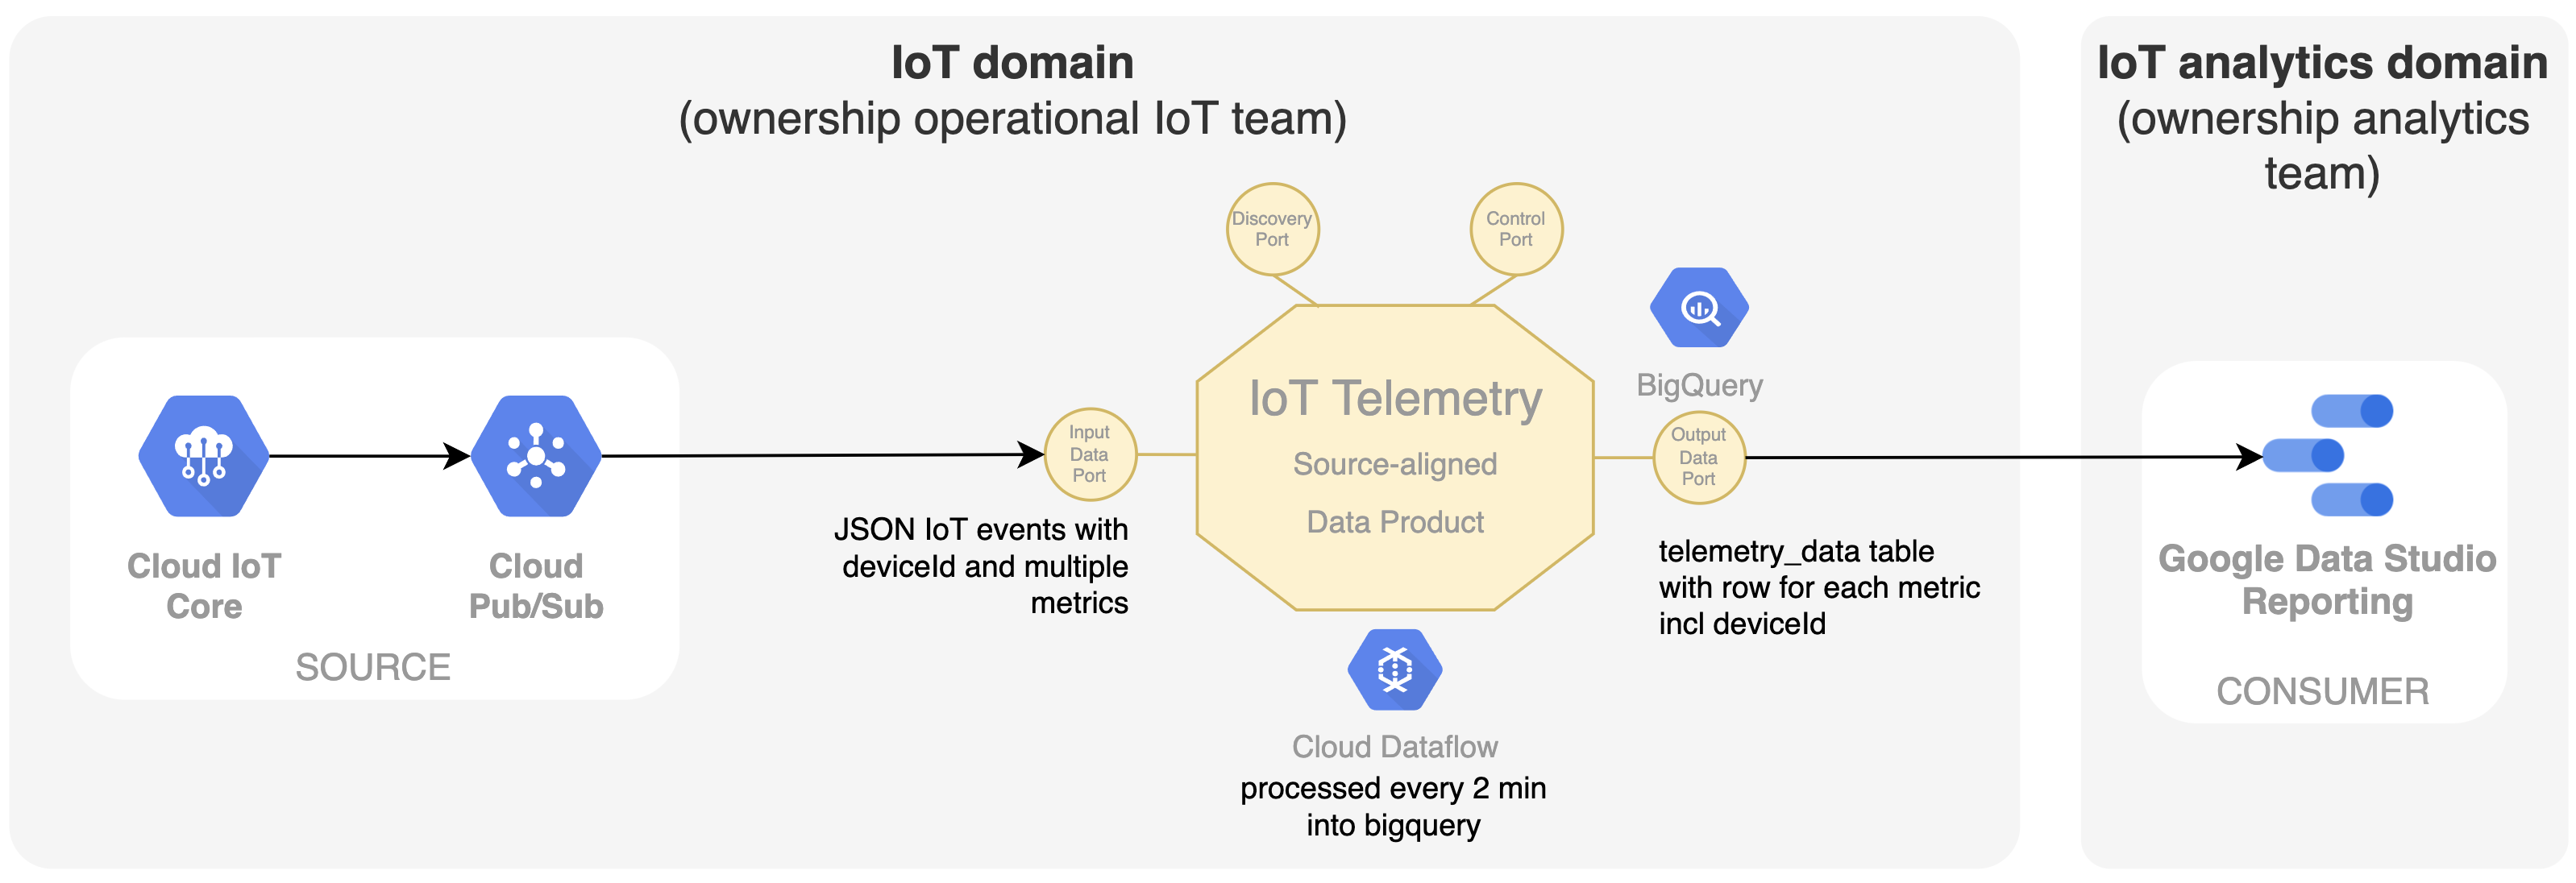 Schema of the components within the IoT domain and the IoT analytics domain